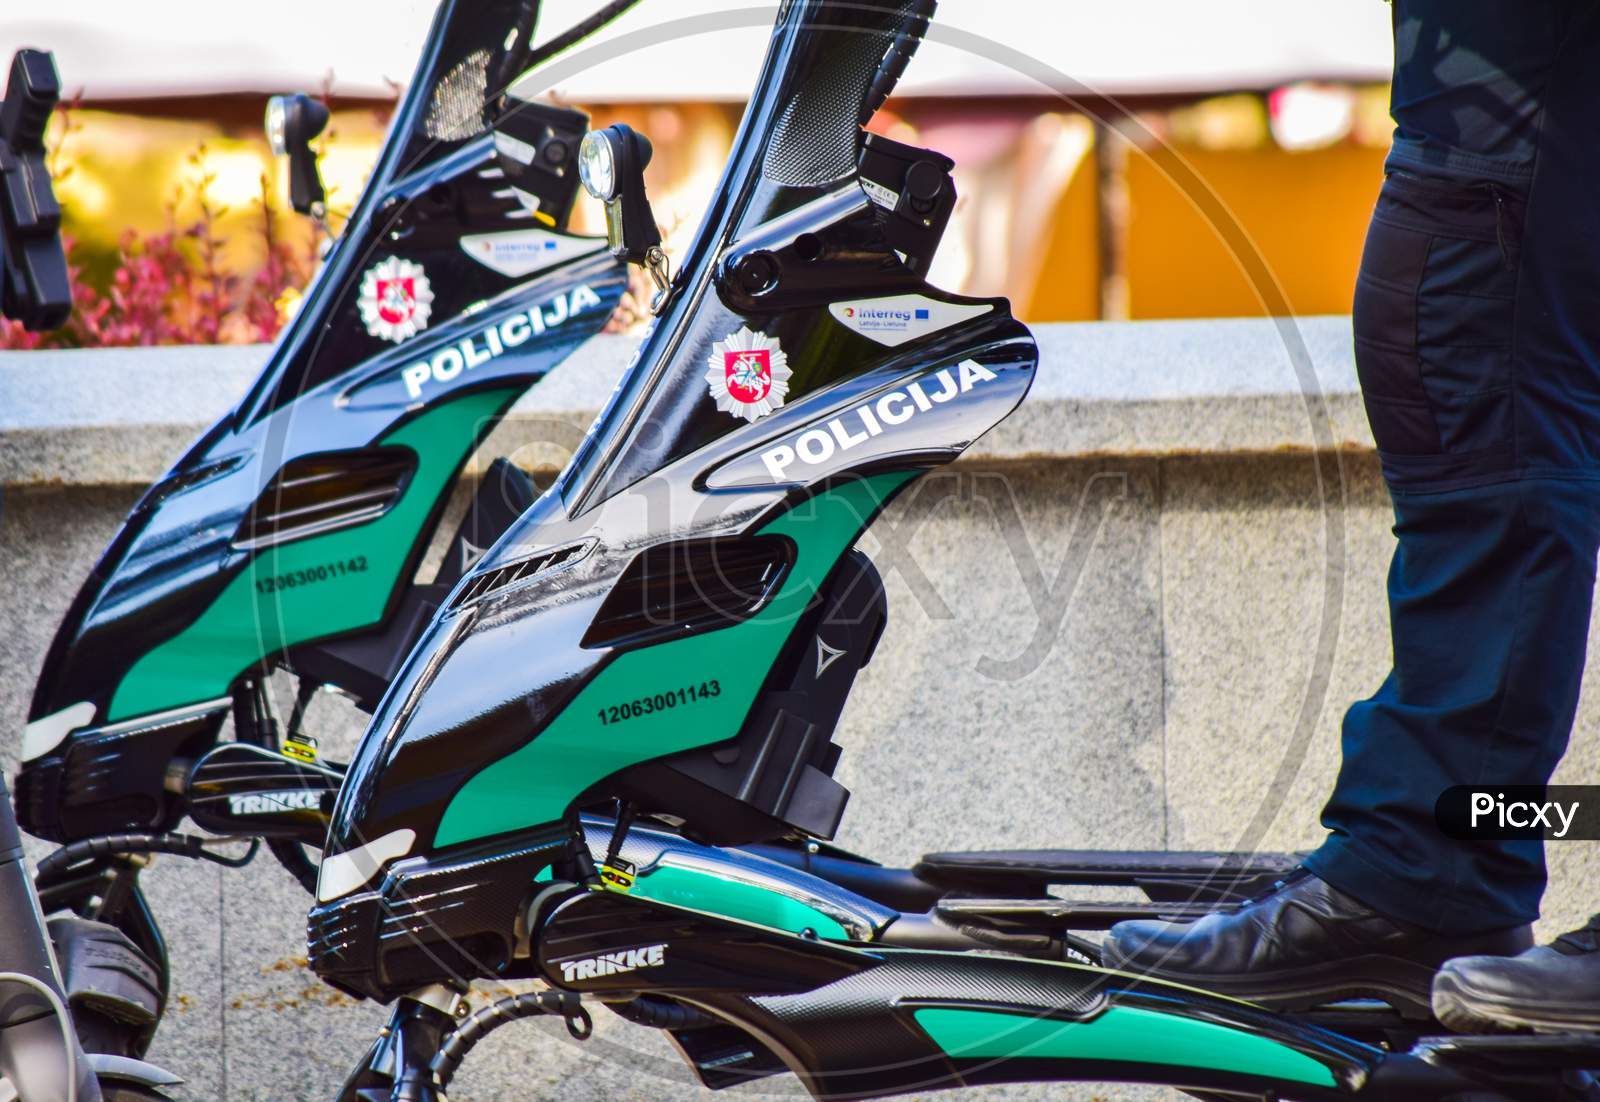 Palanga, Lithuania - 10Th June, 2021: Police Modern Electric Scooter Vehicles For Patrolling In Pedestrian Streets In Lithuania